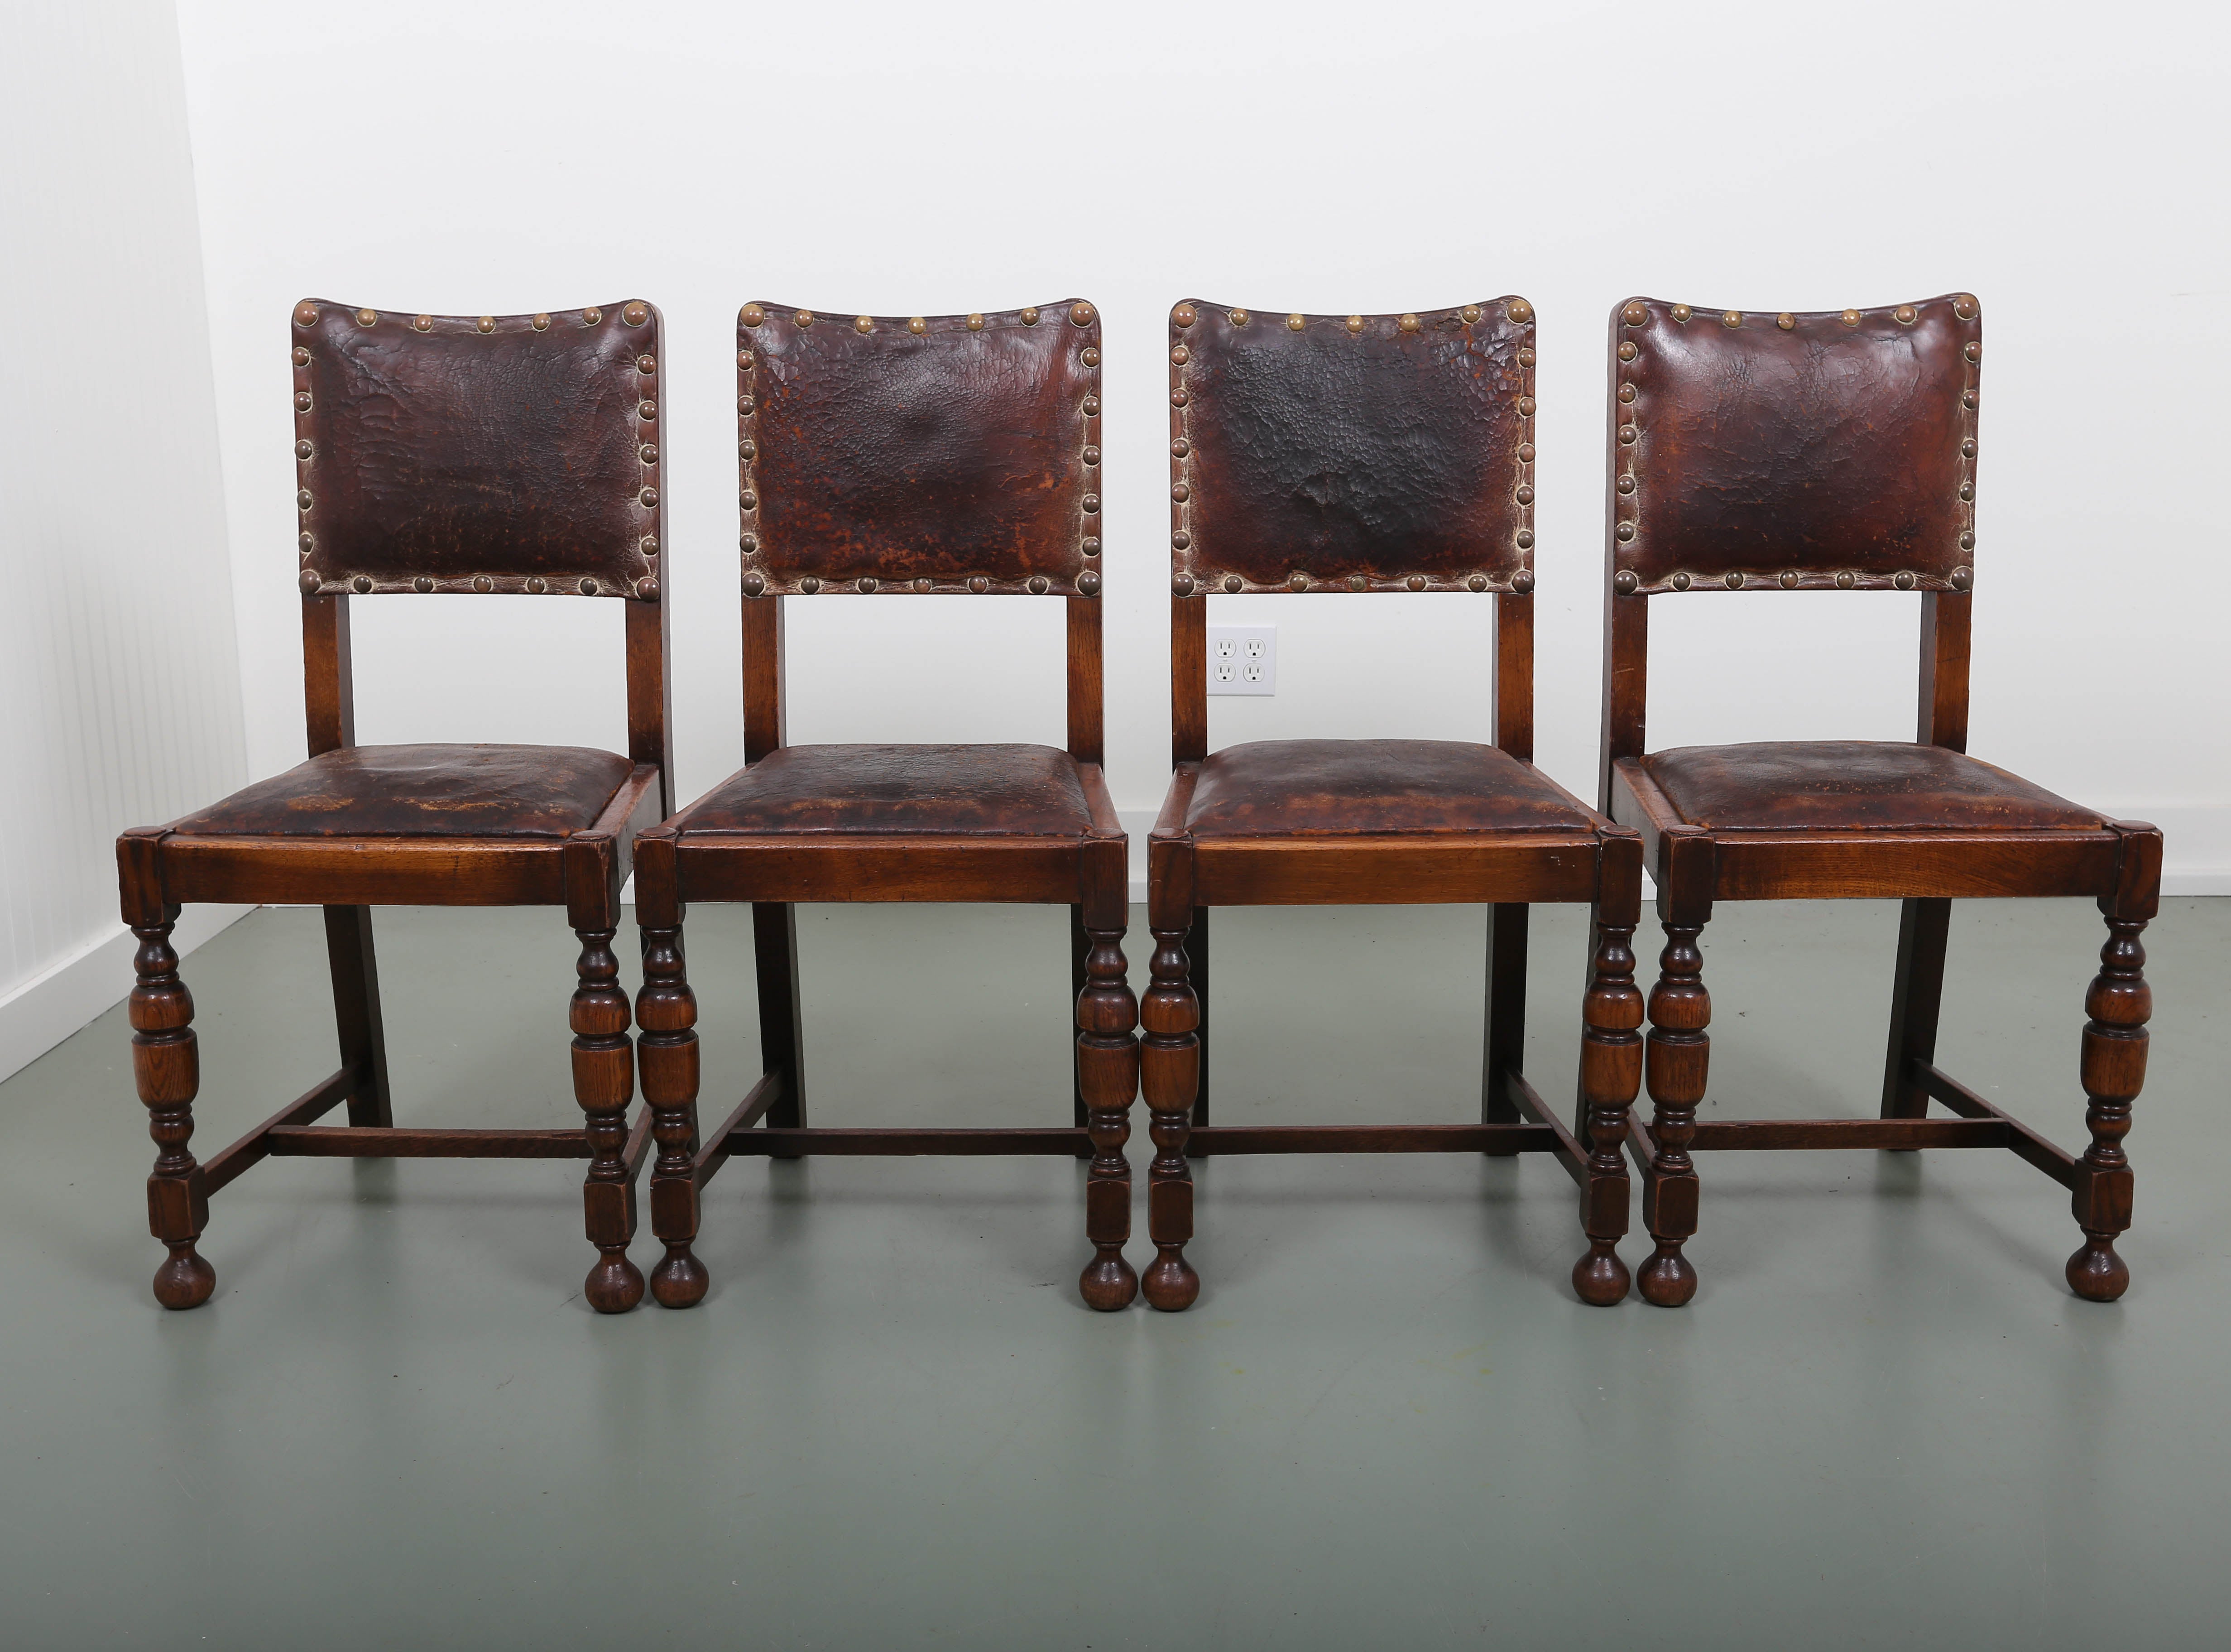 19th century set of four English oakwood dining chairs with leather. Leather in original condition with brass nailheads.